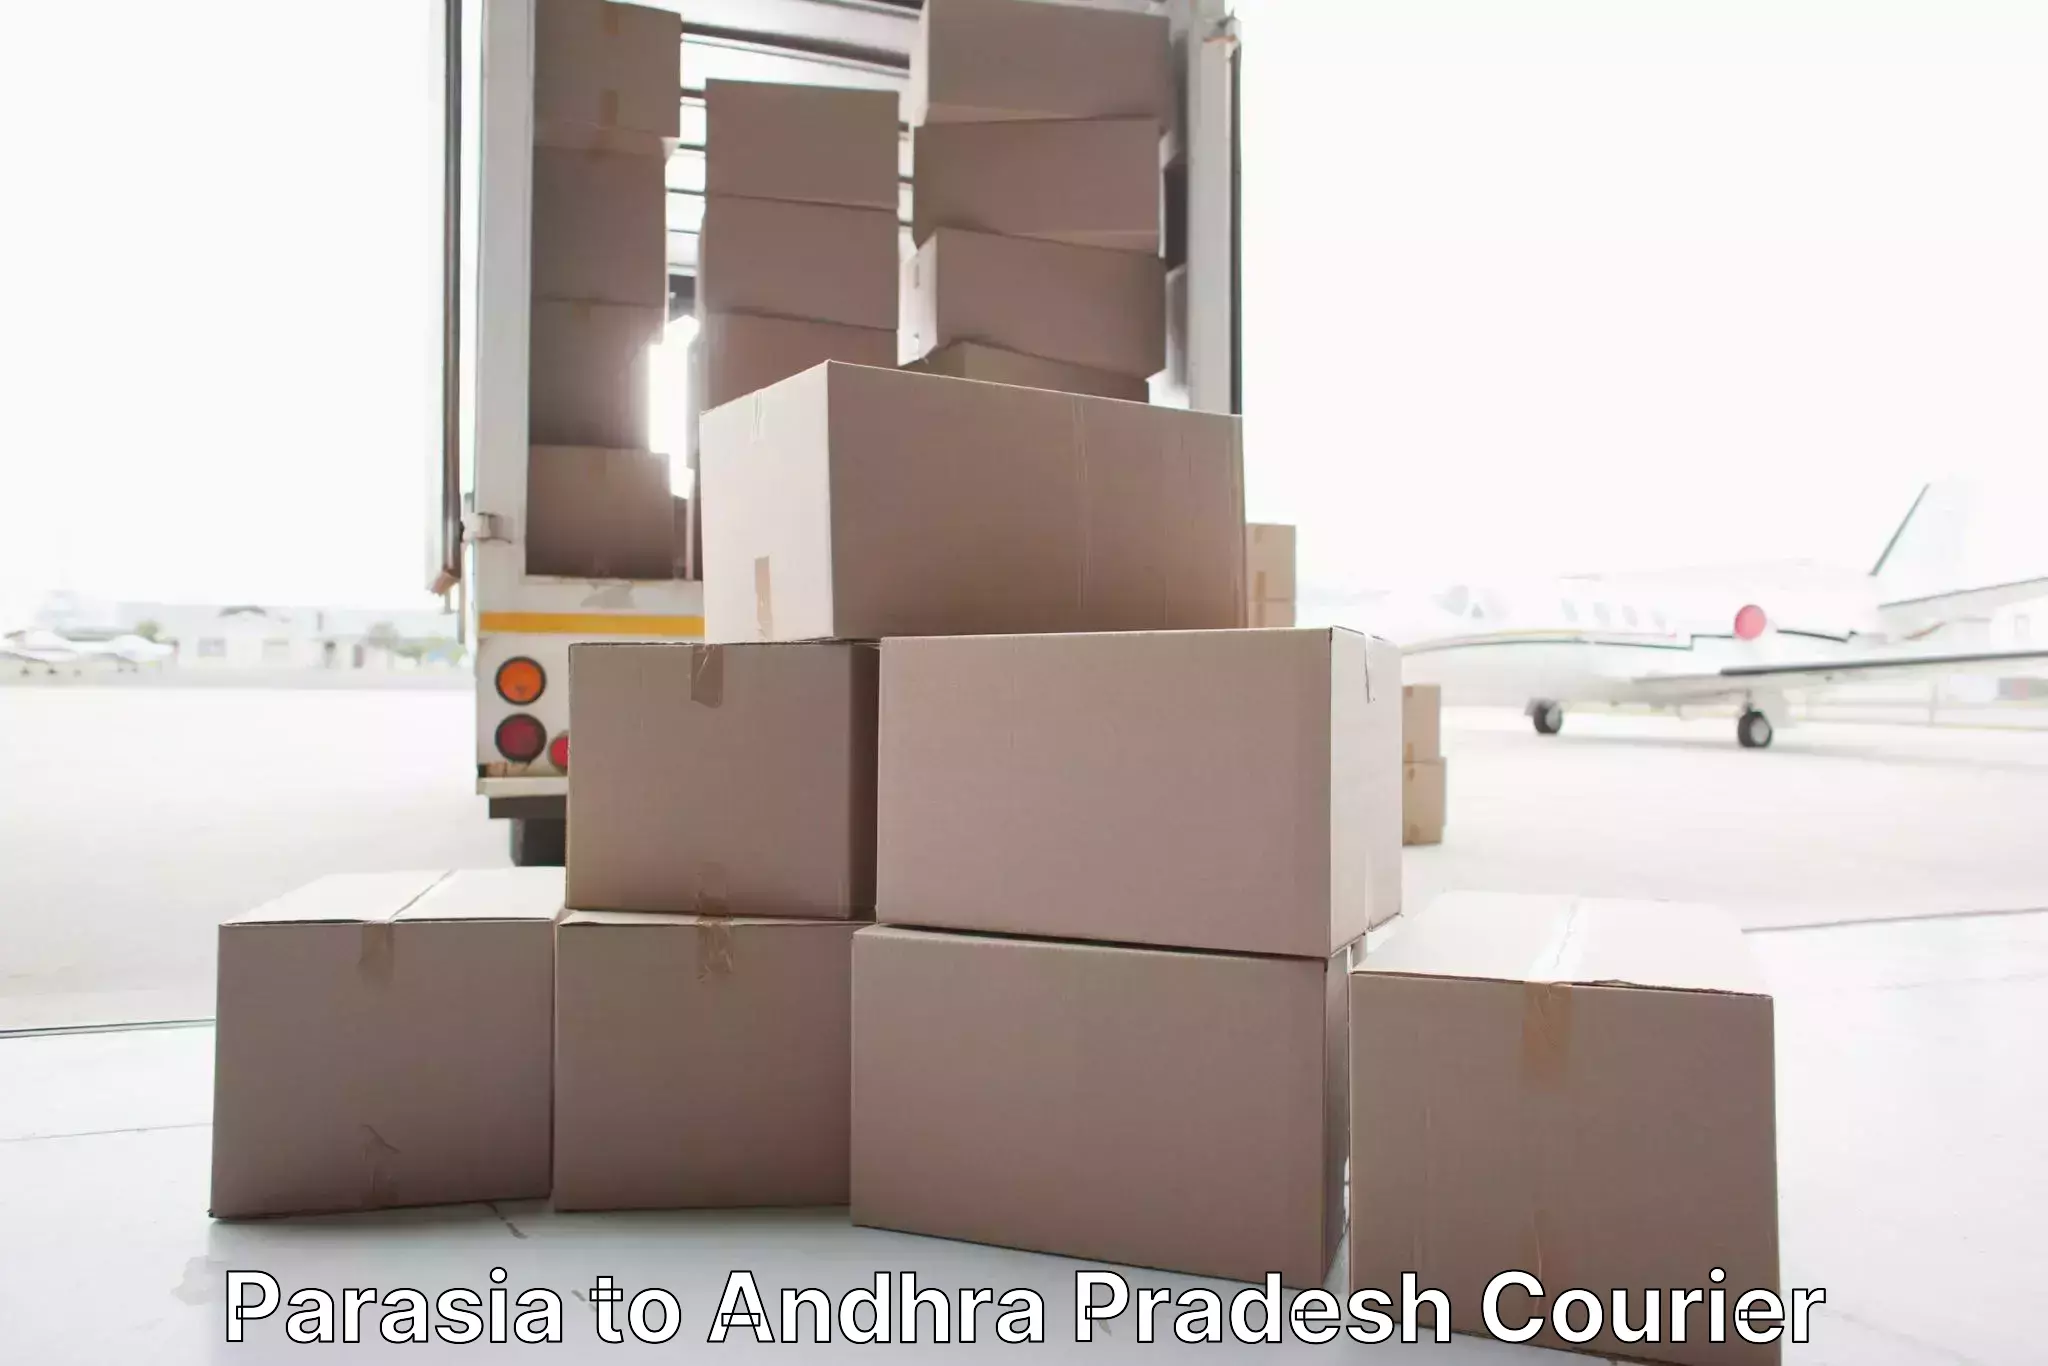 Furniture delivery service Parasia to Chirala